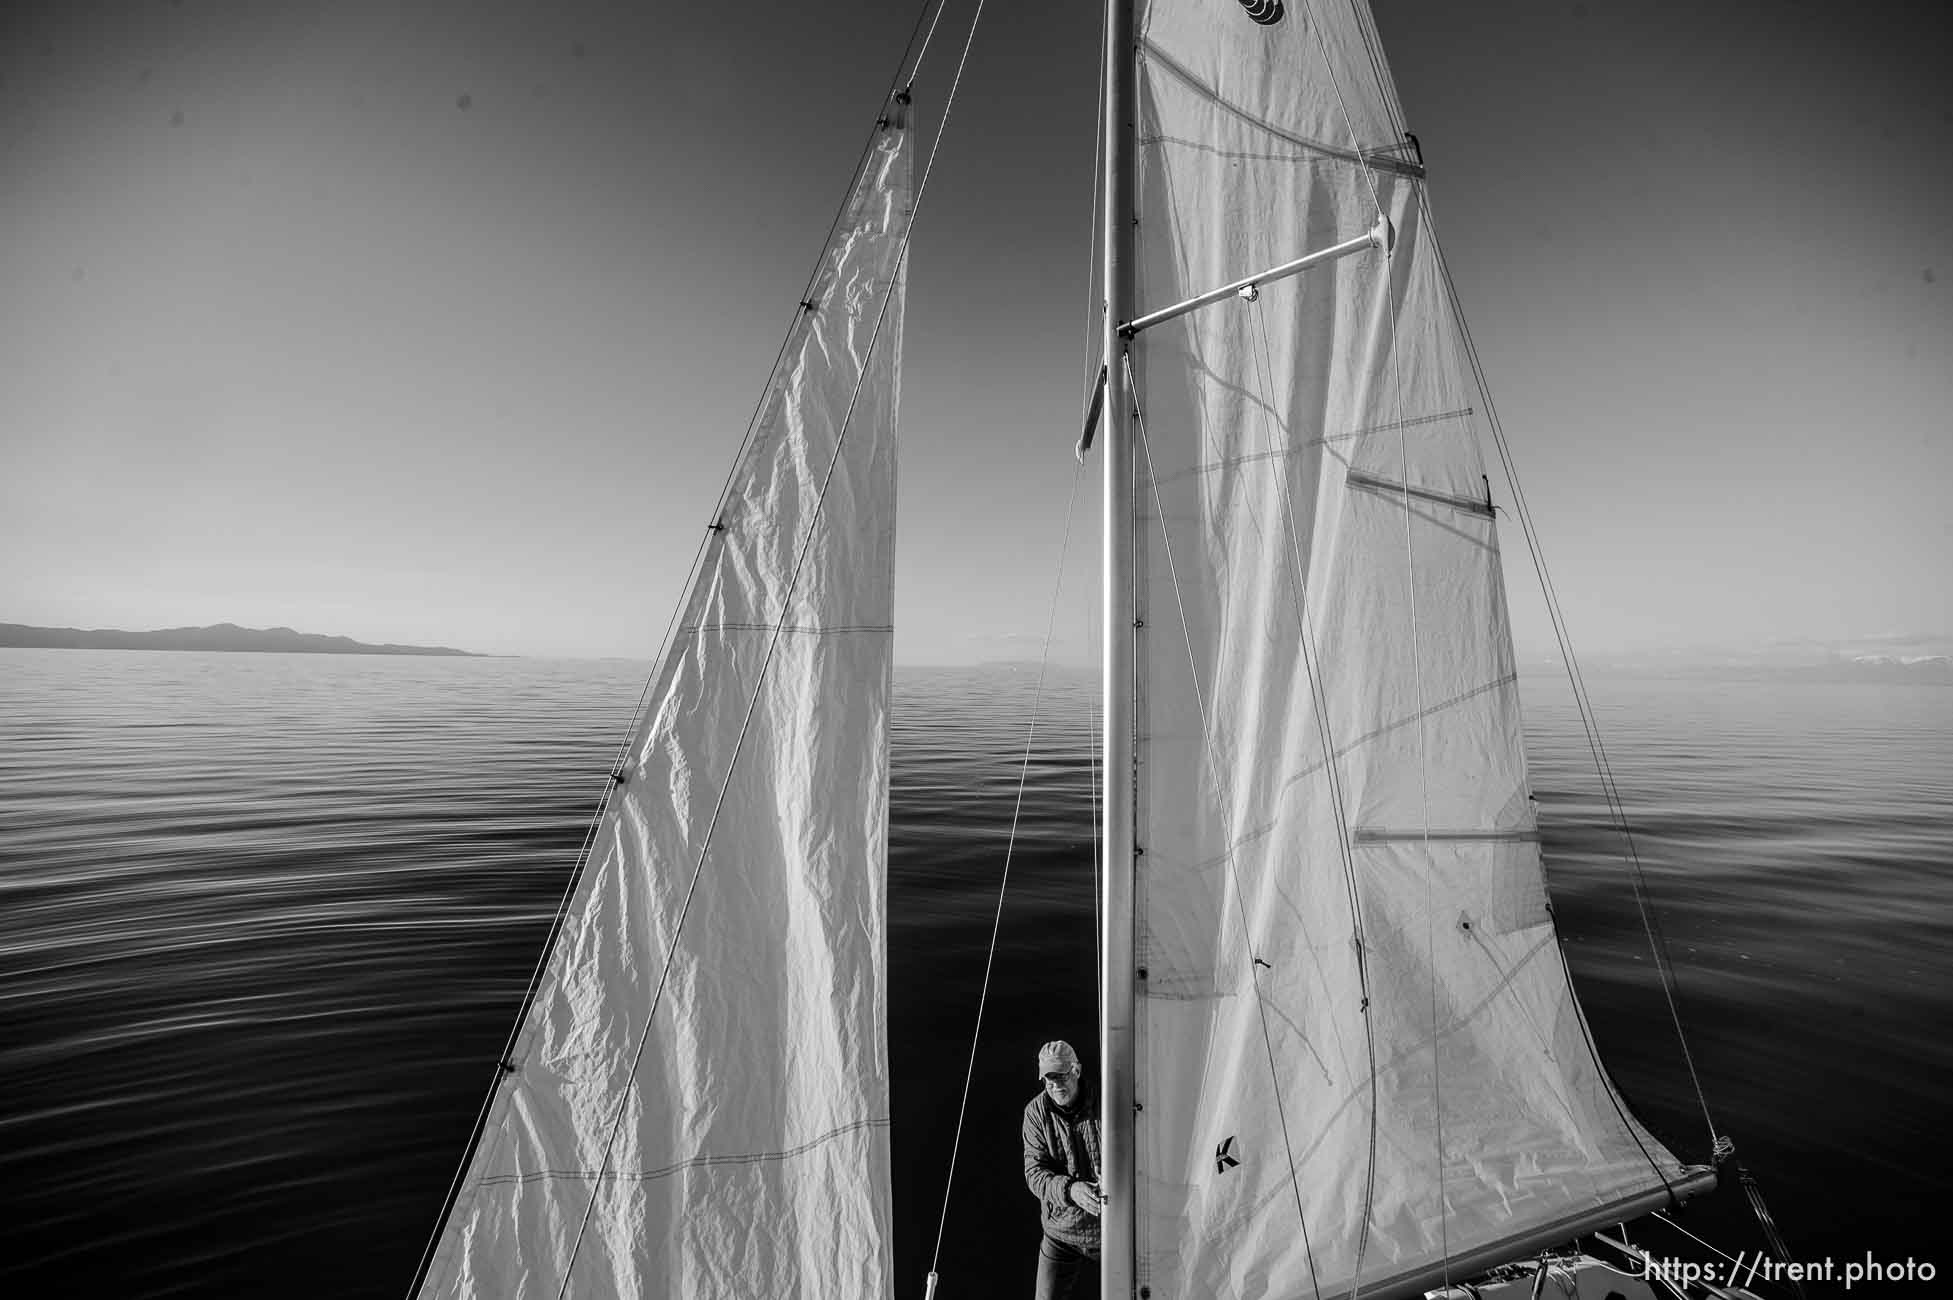 Without dredging at the great salt lake marina, sailing will soon be impossible on Utah's largest body of water, putting an end to a century-old tradition.

, Wednesday February 25, 2015.